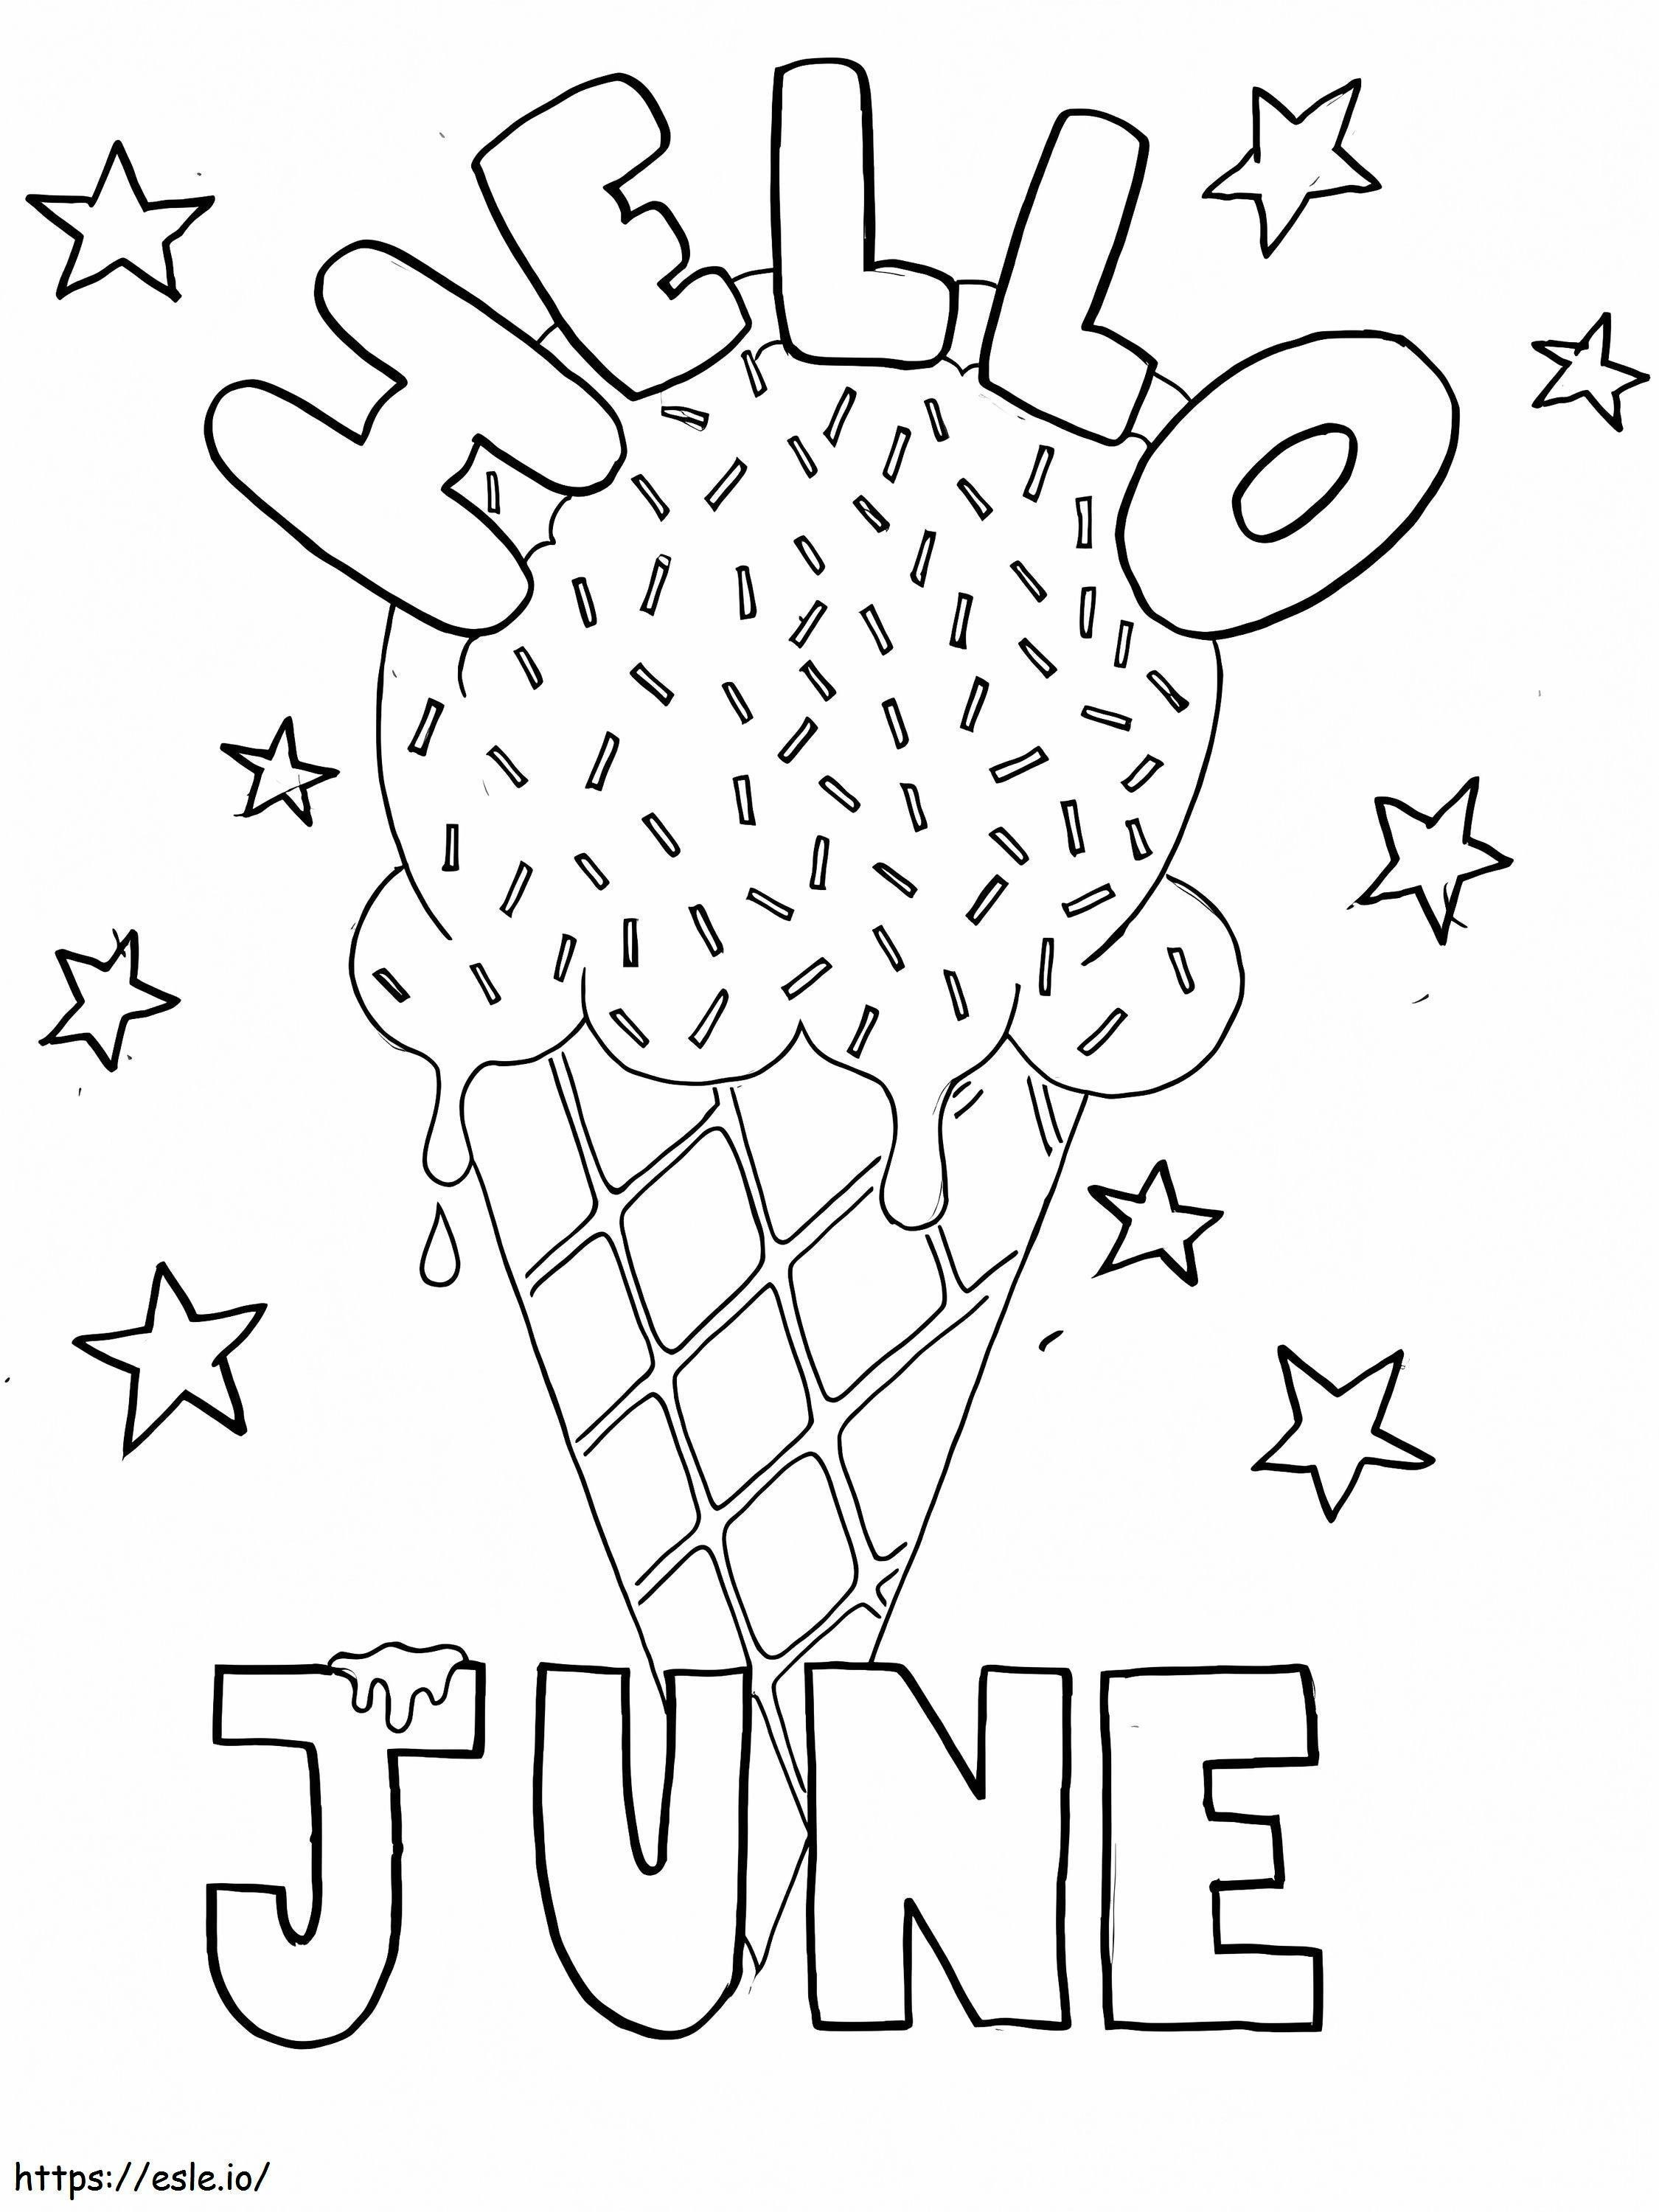 Hello June 1St coloring page